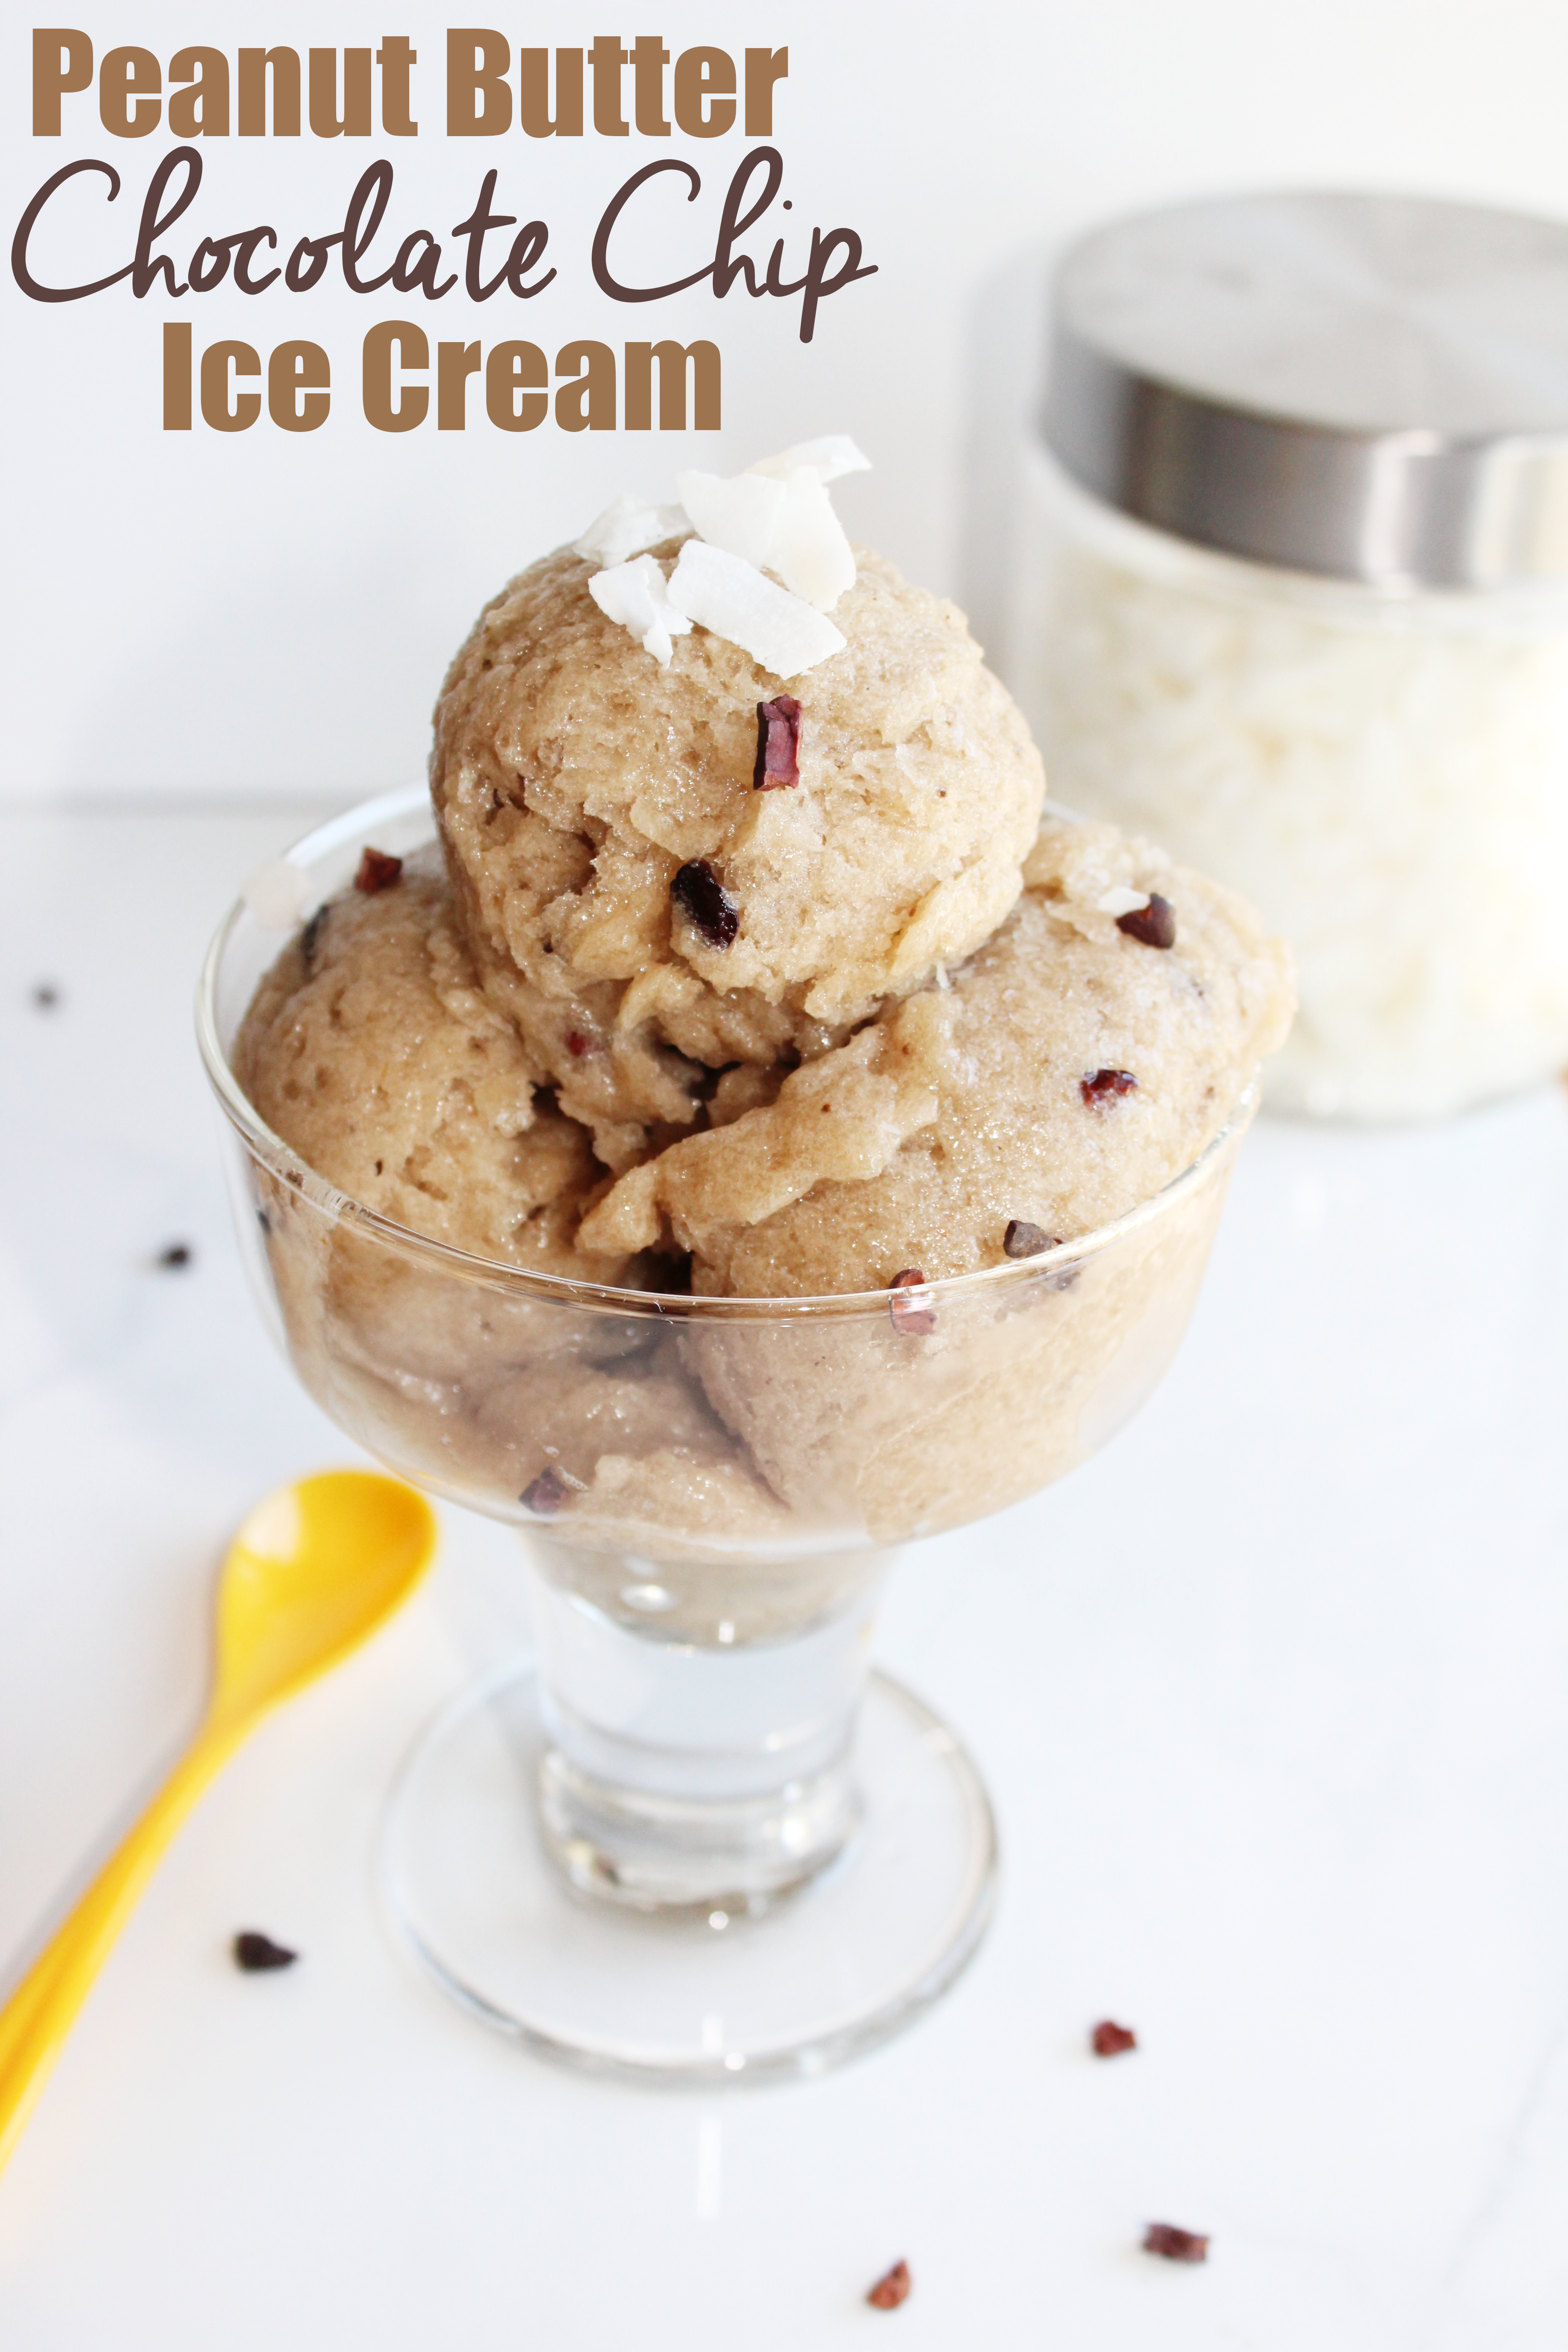 Vegan peanut butter and chocolate chip ice cream. Dairy and gluten free!